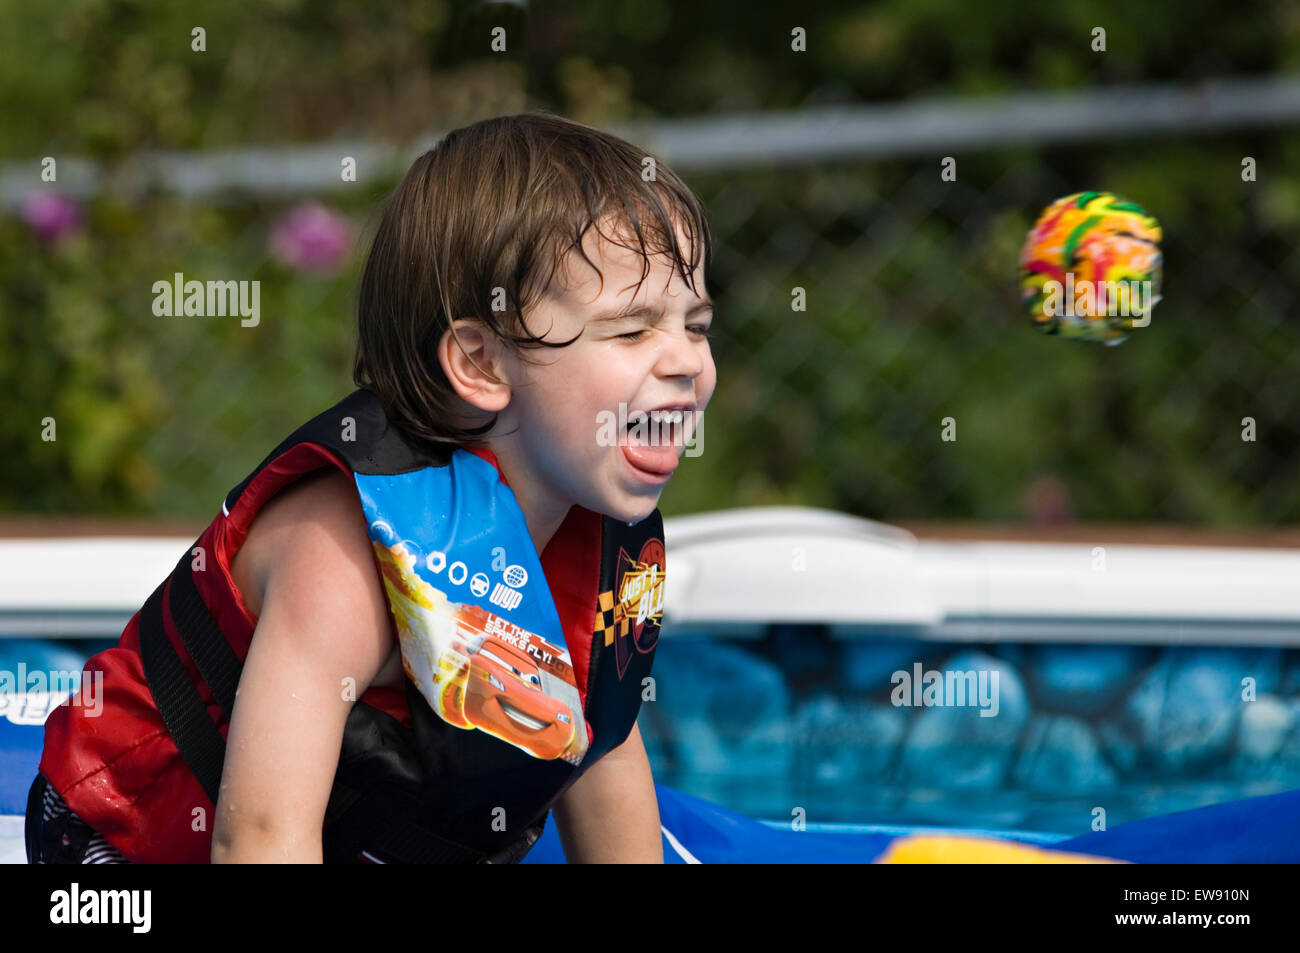 Small Ball about to Hit Young Boy in the Face while Playing In Swimming Pool Stock Photo